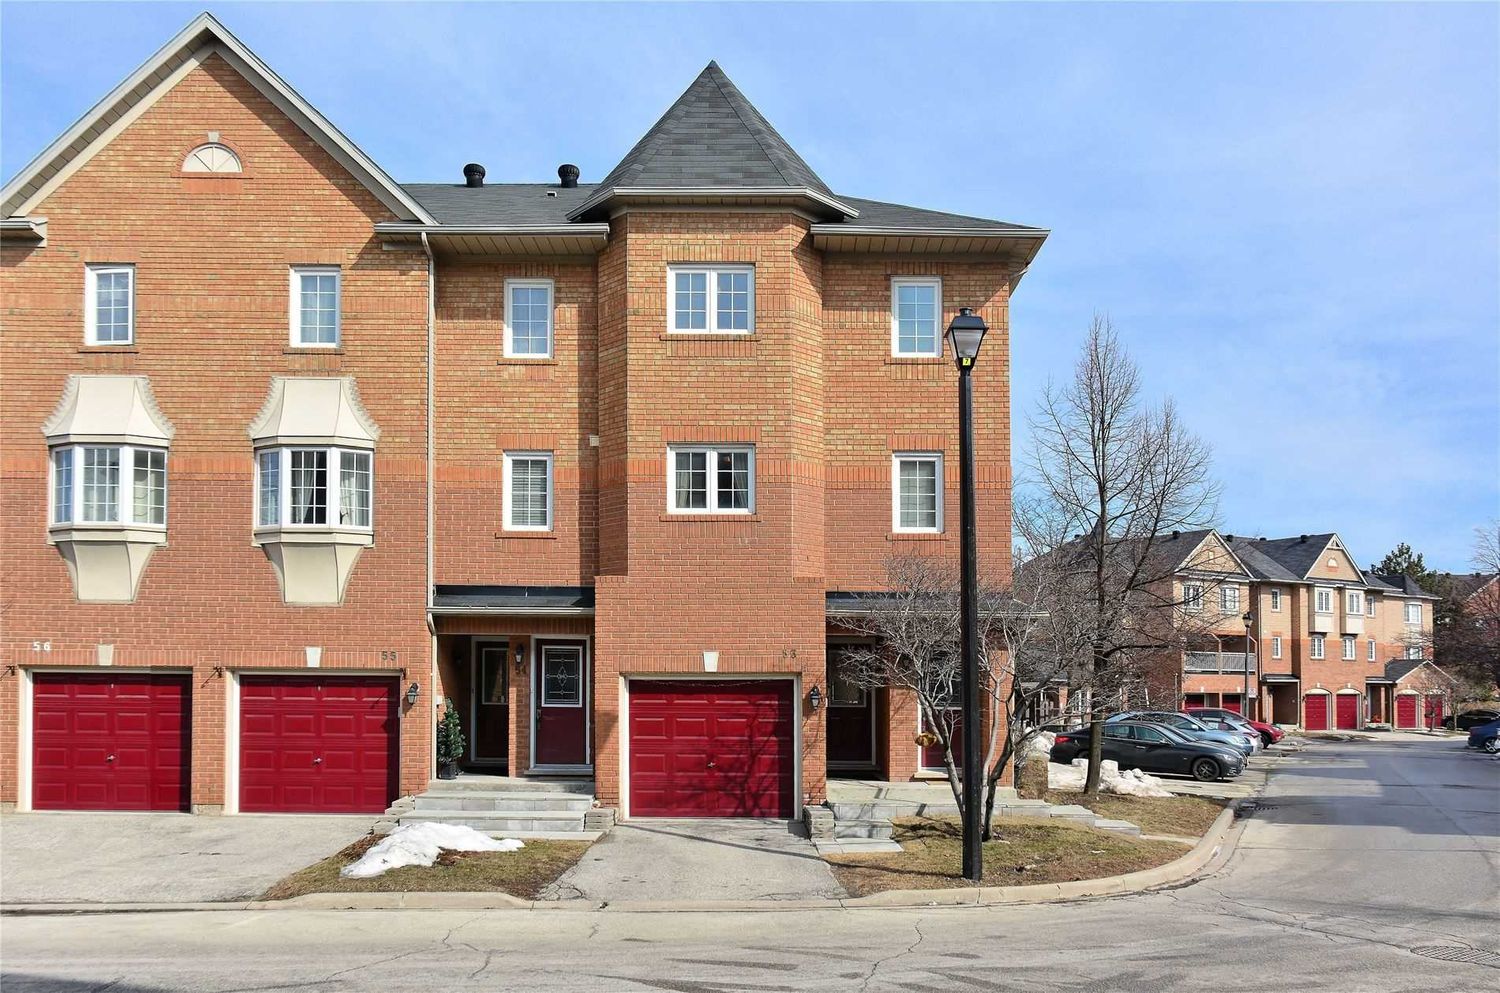 6950 Tenth Line W. Avonlea Village Townhomes is located in  Mississauga, Toronto - image #1 of 2